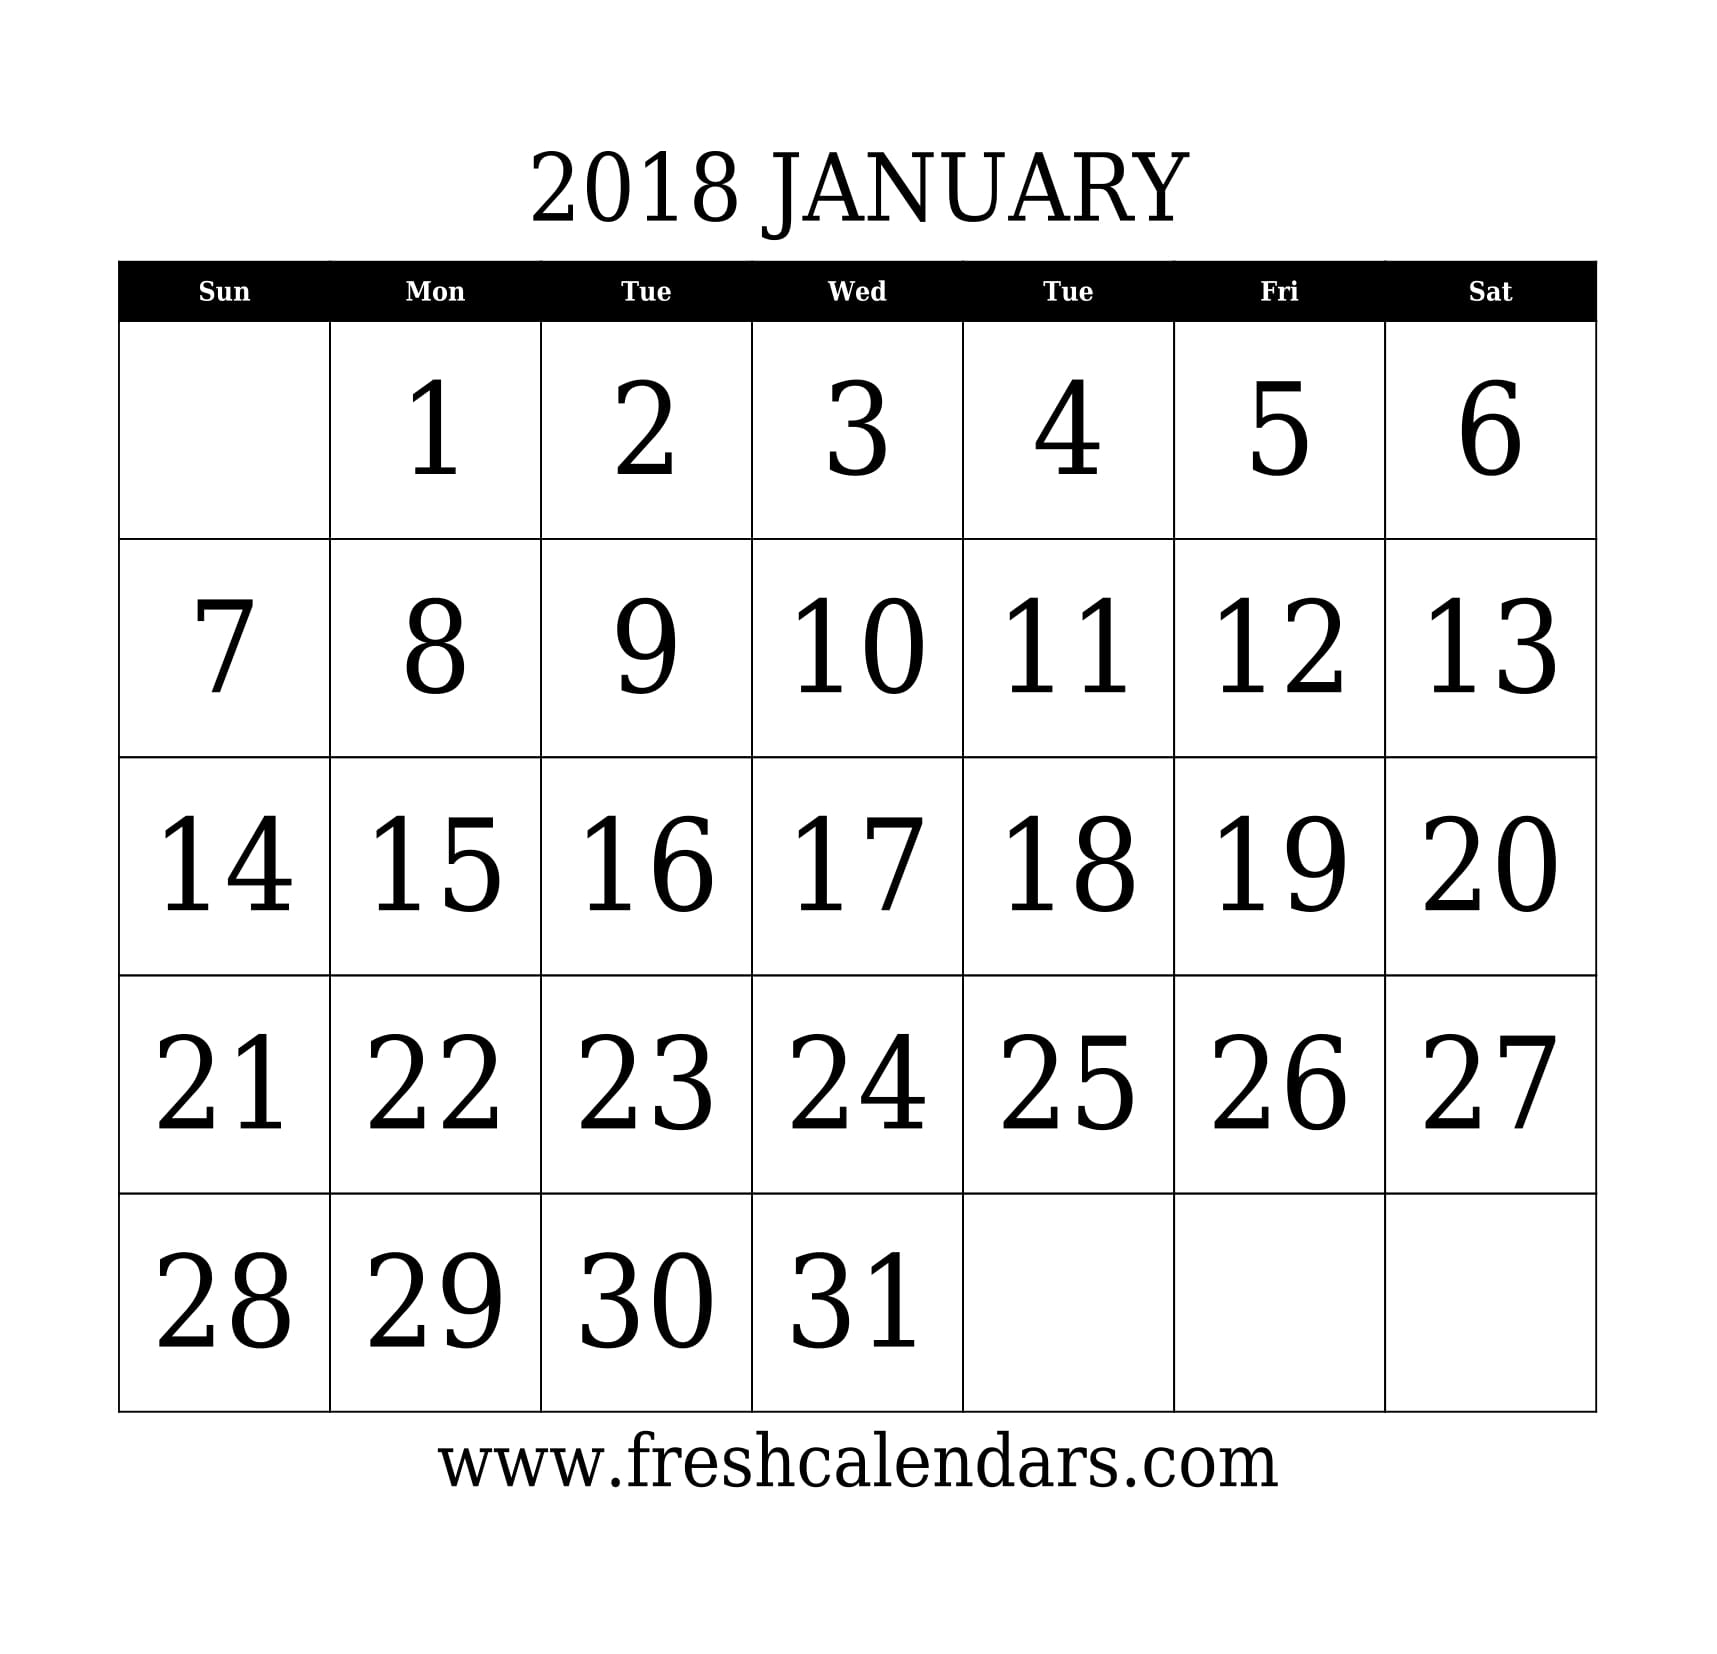 January 2018 Calendar With Large Dates